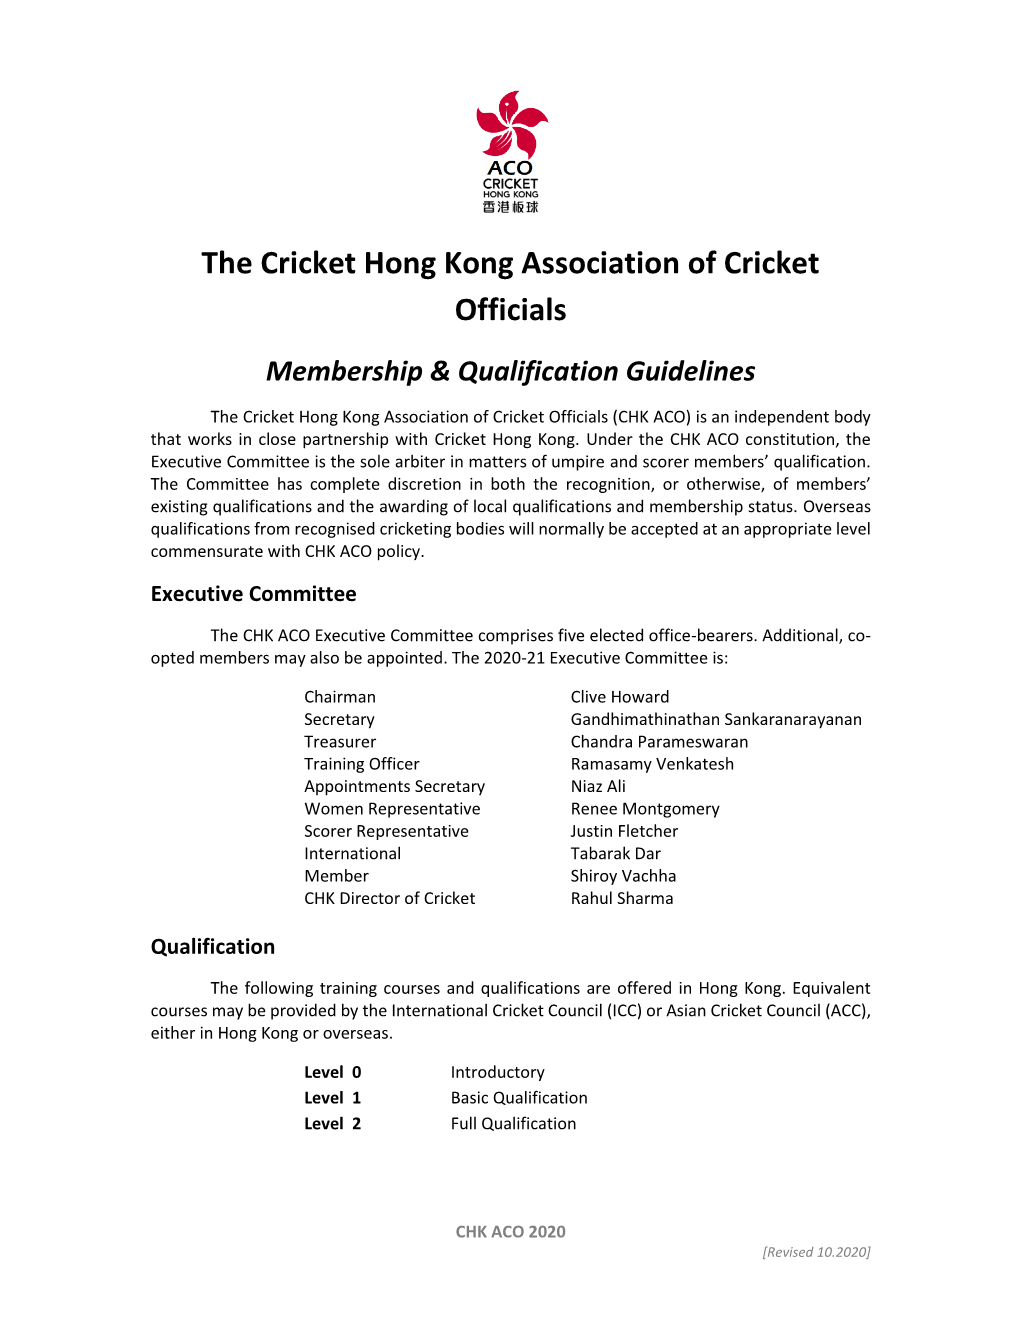 The Cricket Hong Kong Association of Cricket Officials Membership & Qualification Guidelines